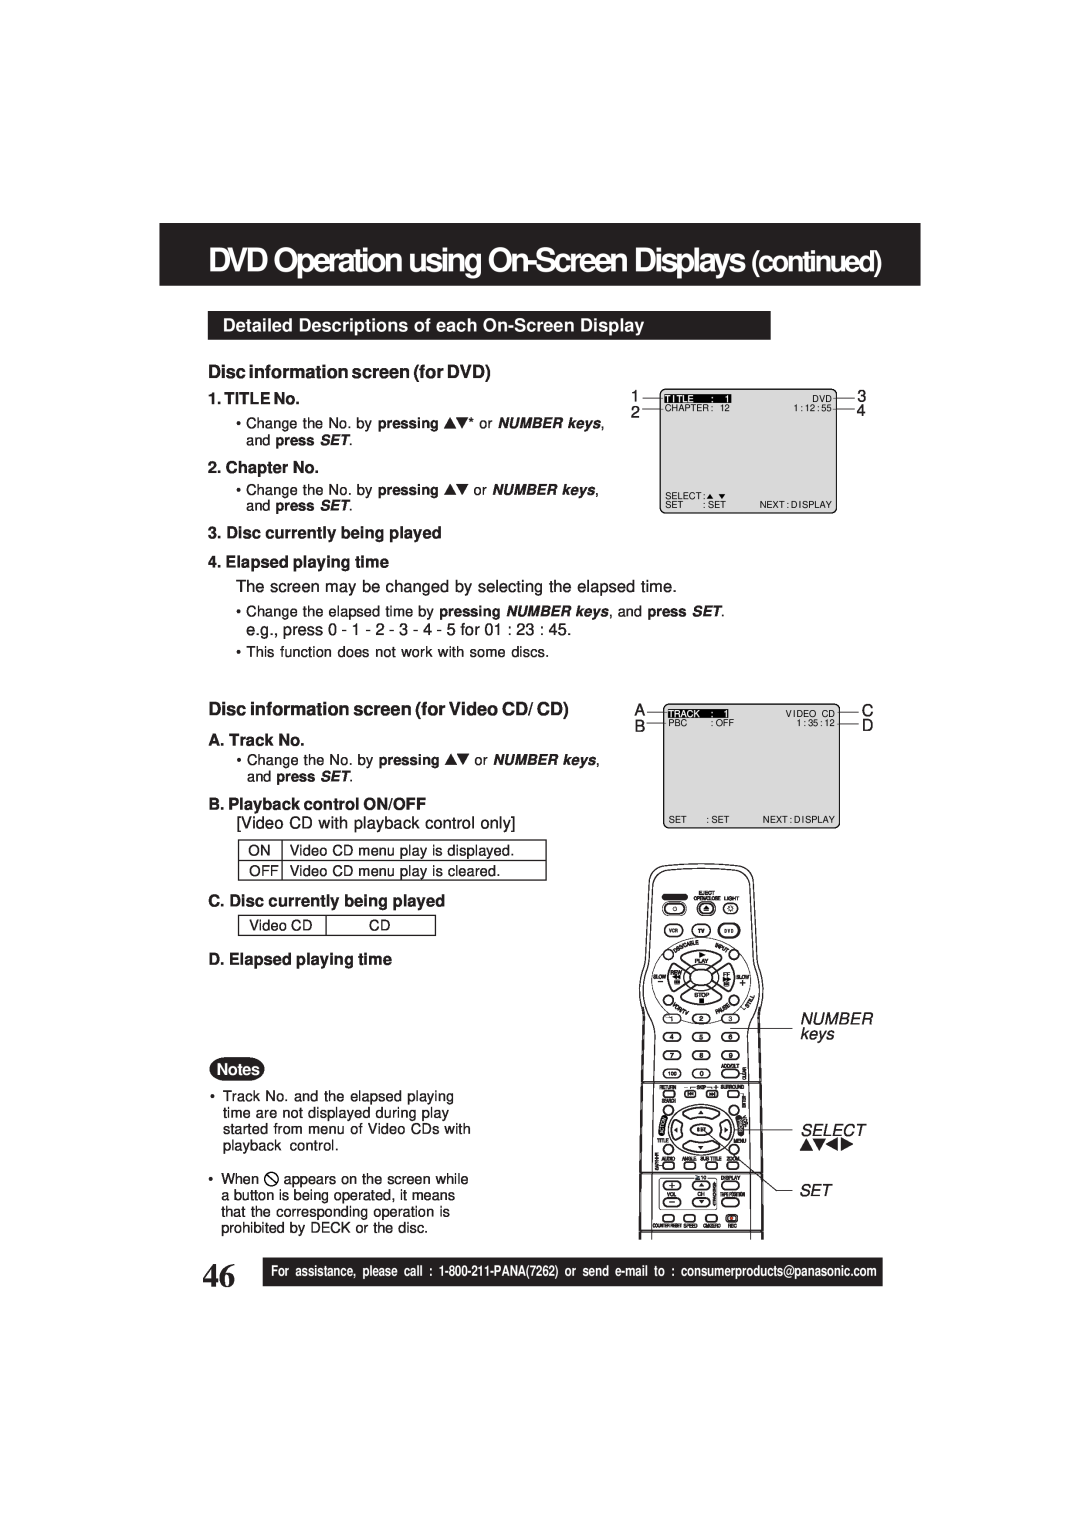 Panasonic PV-D4761 DVD Operation using On-Screen Displays continued, Detailed Descriptions of each On-Screen Display 